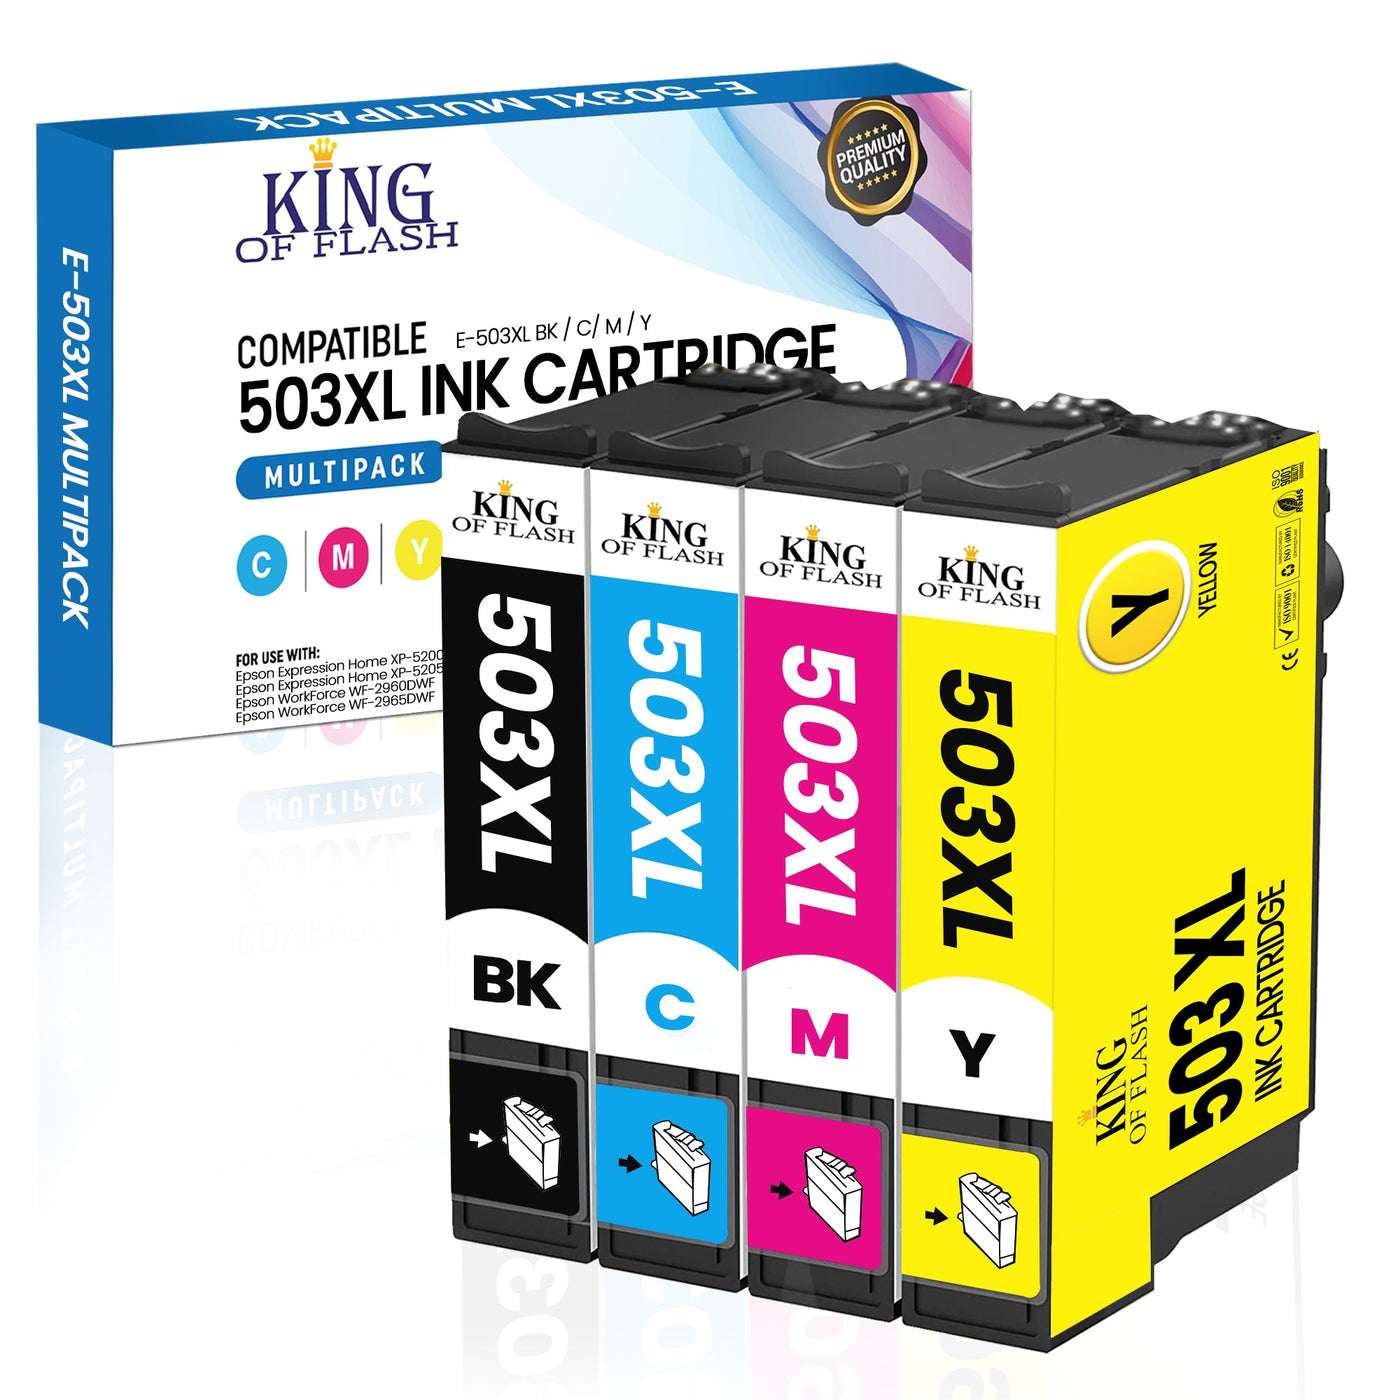 Compatible Epson 503xl Black Ink Cartridge Pack Of 4 — King Of Flash Uk 0197